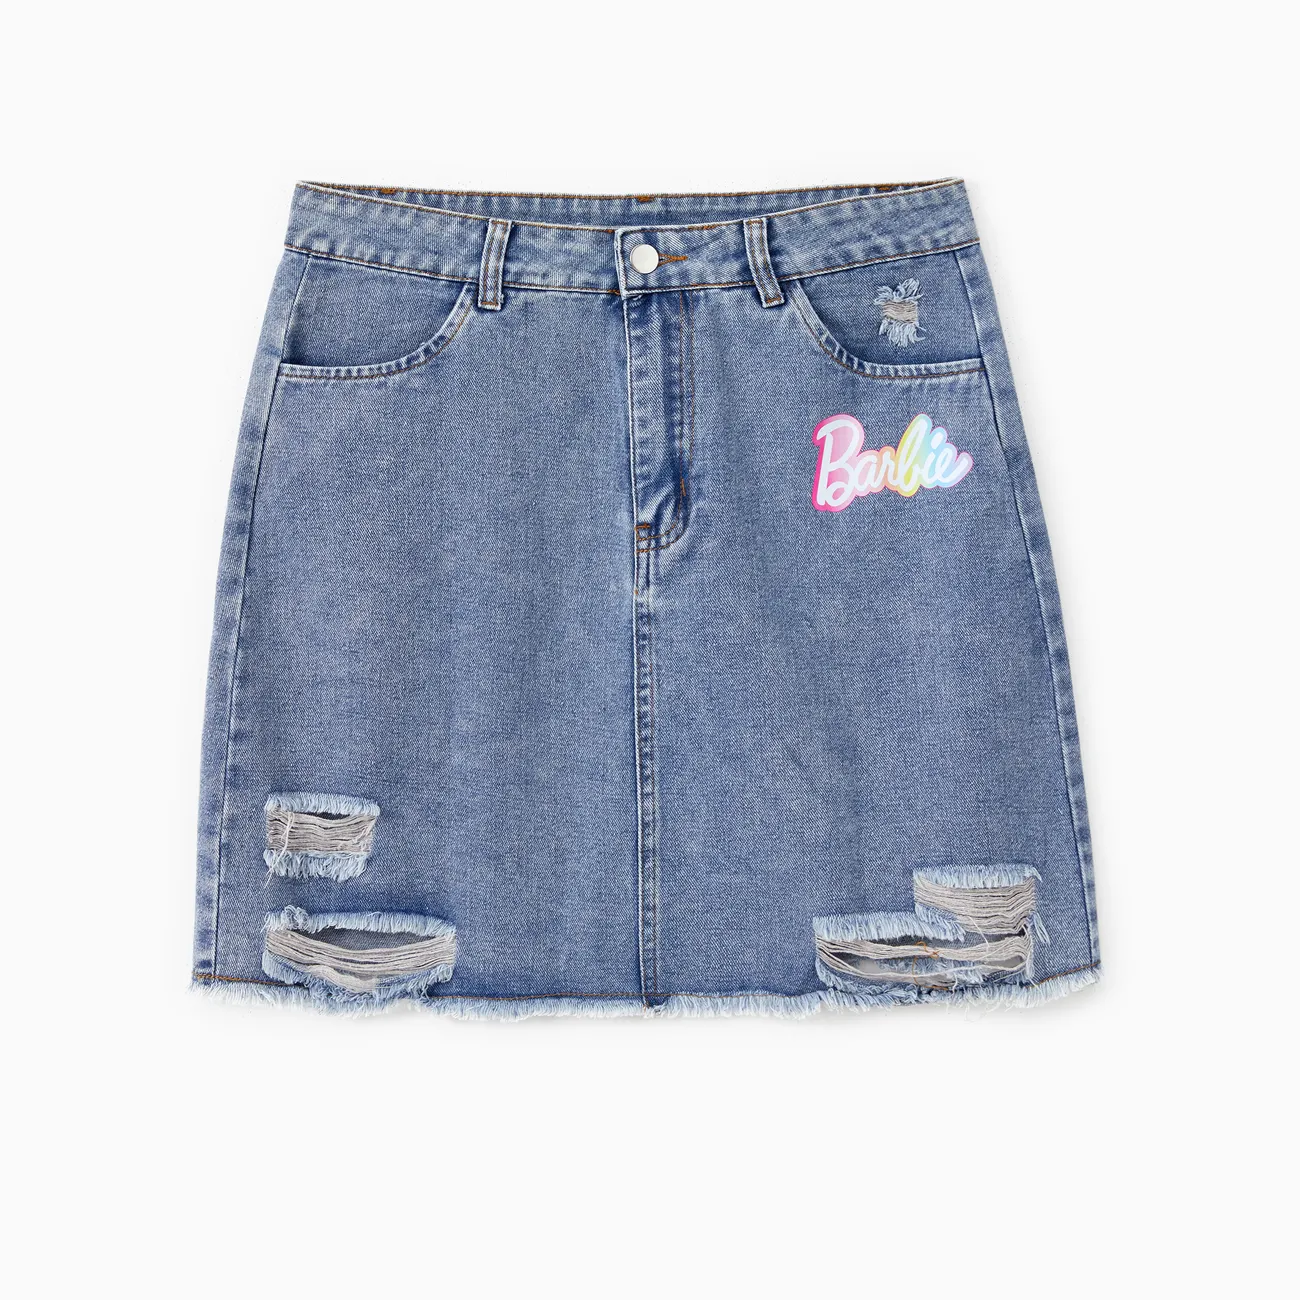 Barbie Mommy and Me Colorful Classic Letter Logo Print Denim Skirt Blue big image 1